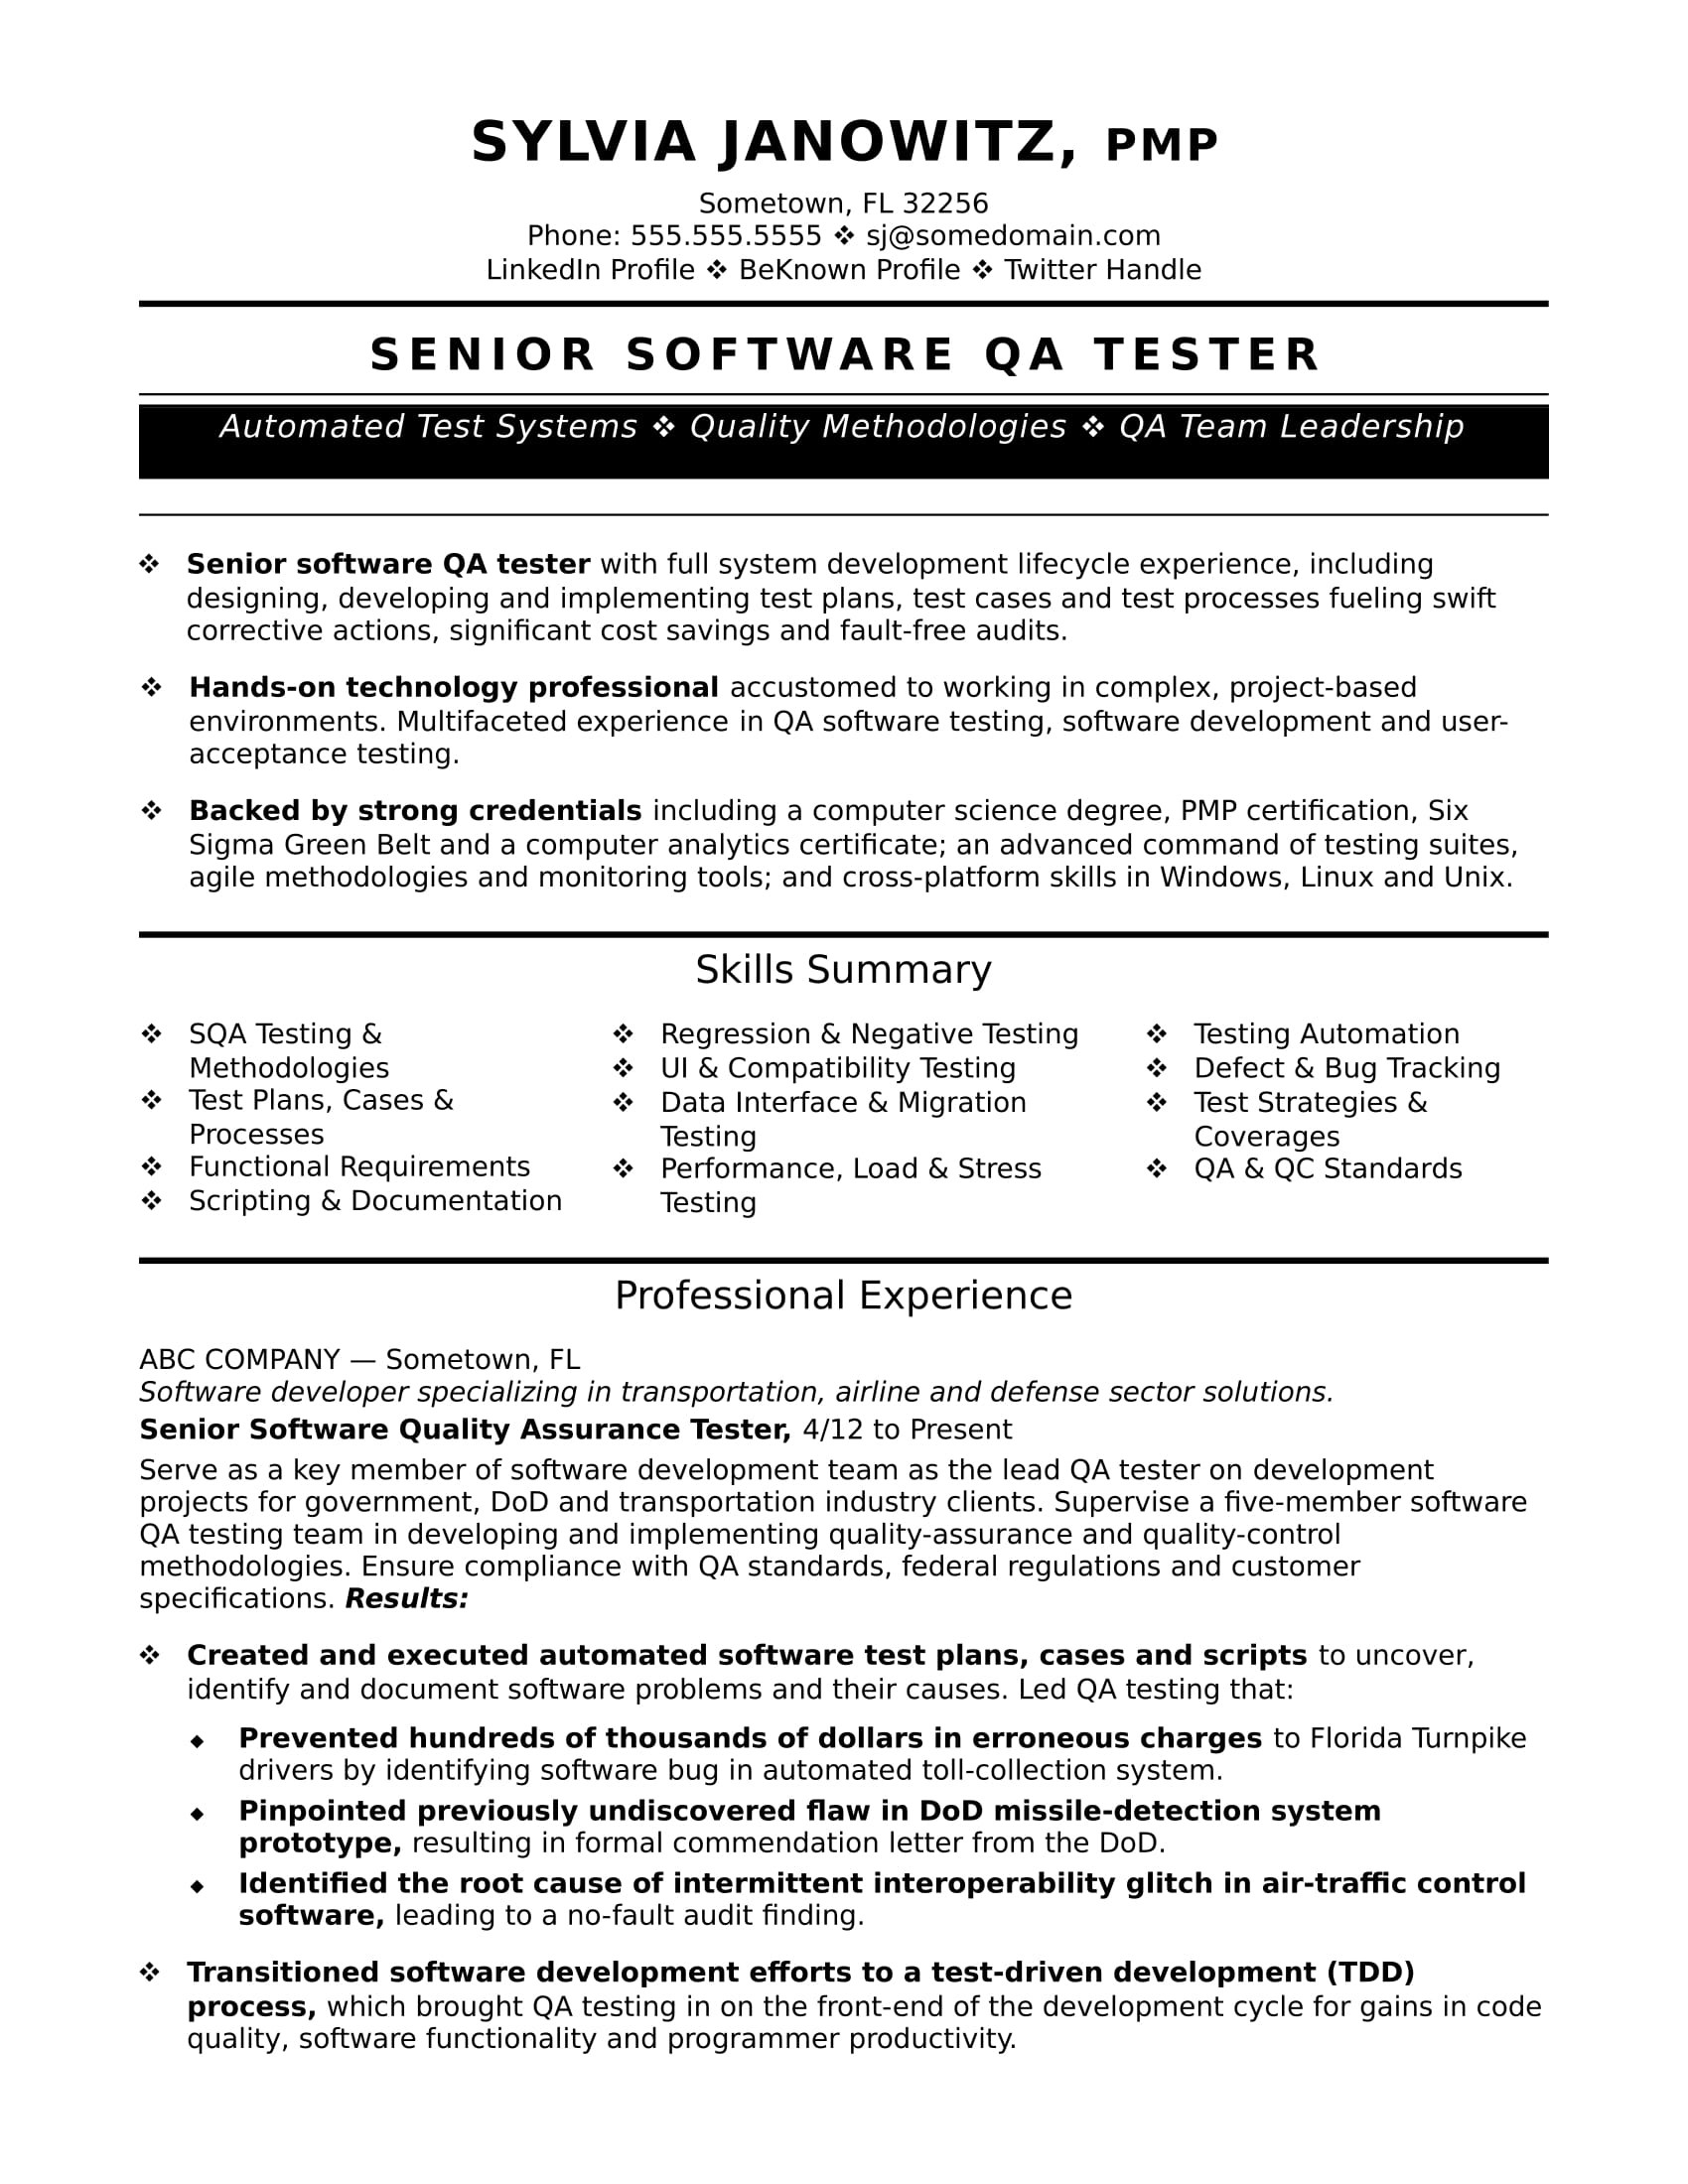 Software Testing 8 Years Experience Sample Resume Experienced Qa software Tester Resume Sample Monster.com